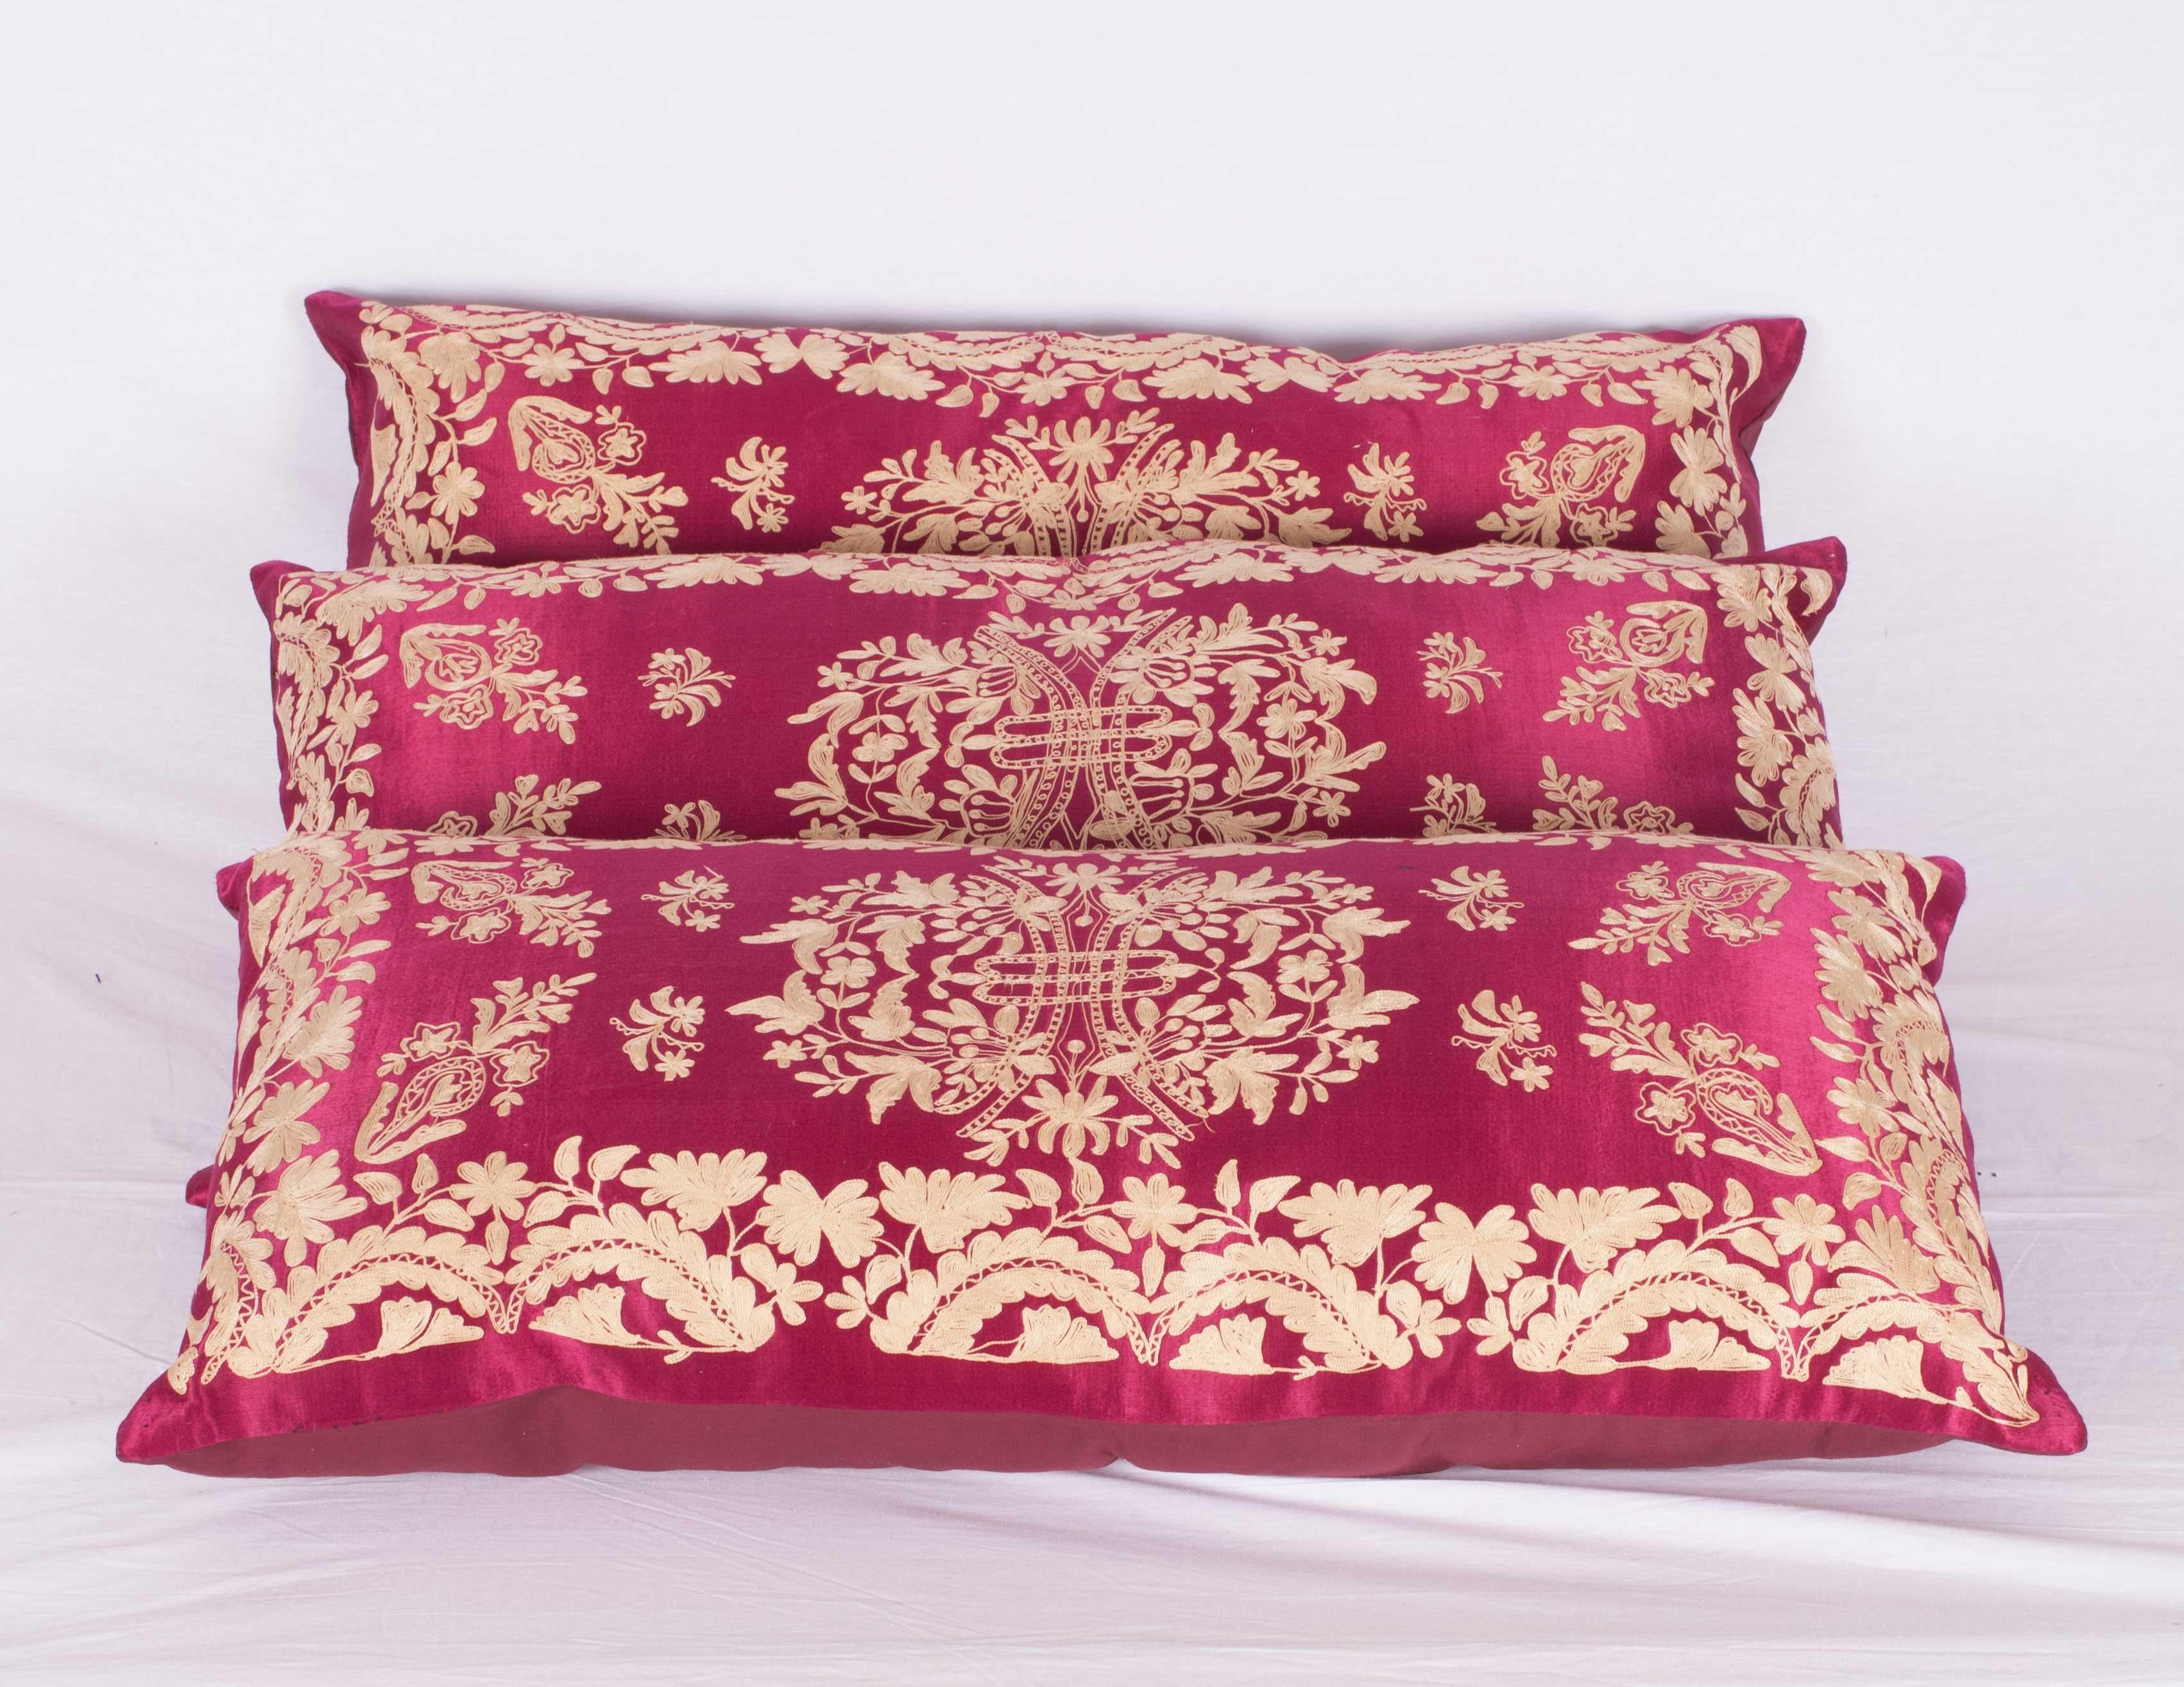 Silk Antique Ottoman Turkish Pillow Cases Late 19th-Early 20th Century For Sale